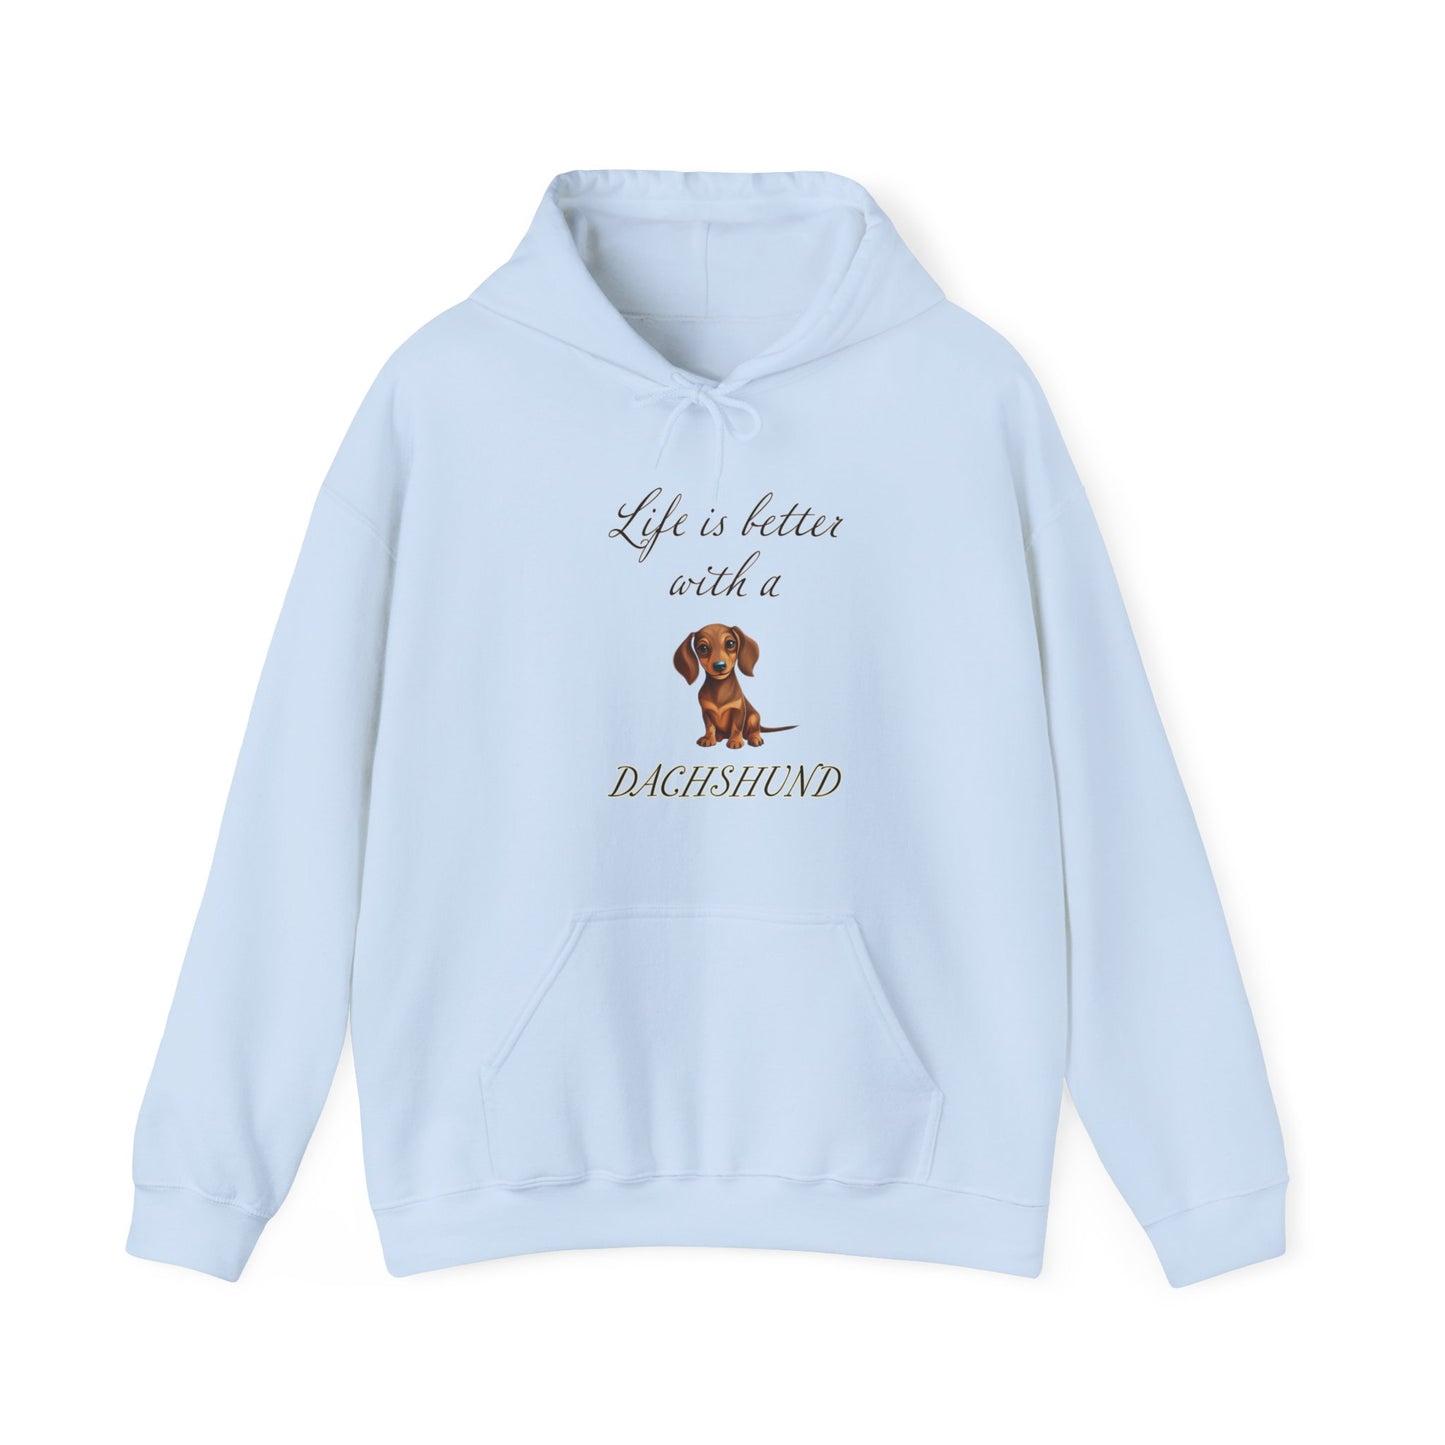 Life is Better with a Dachshund Hoodie - Unisex Heavy Blend Hooded Dog Mom or Dog Dad Sweatshirt, gift for Dog Mom, Gift for Dog Dad